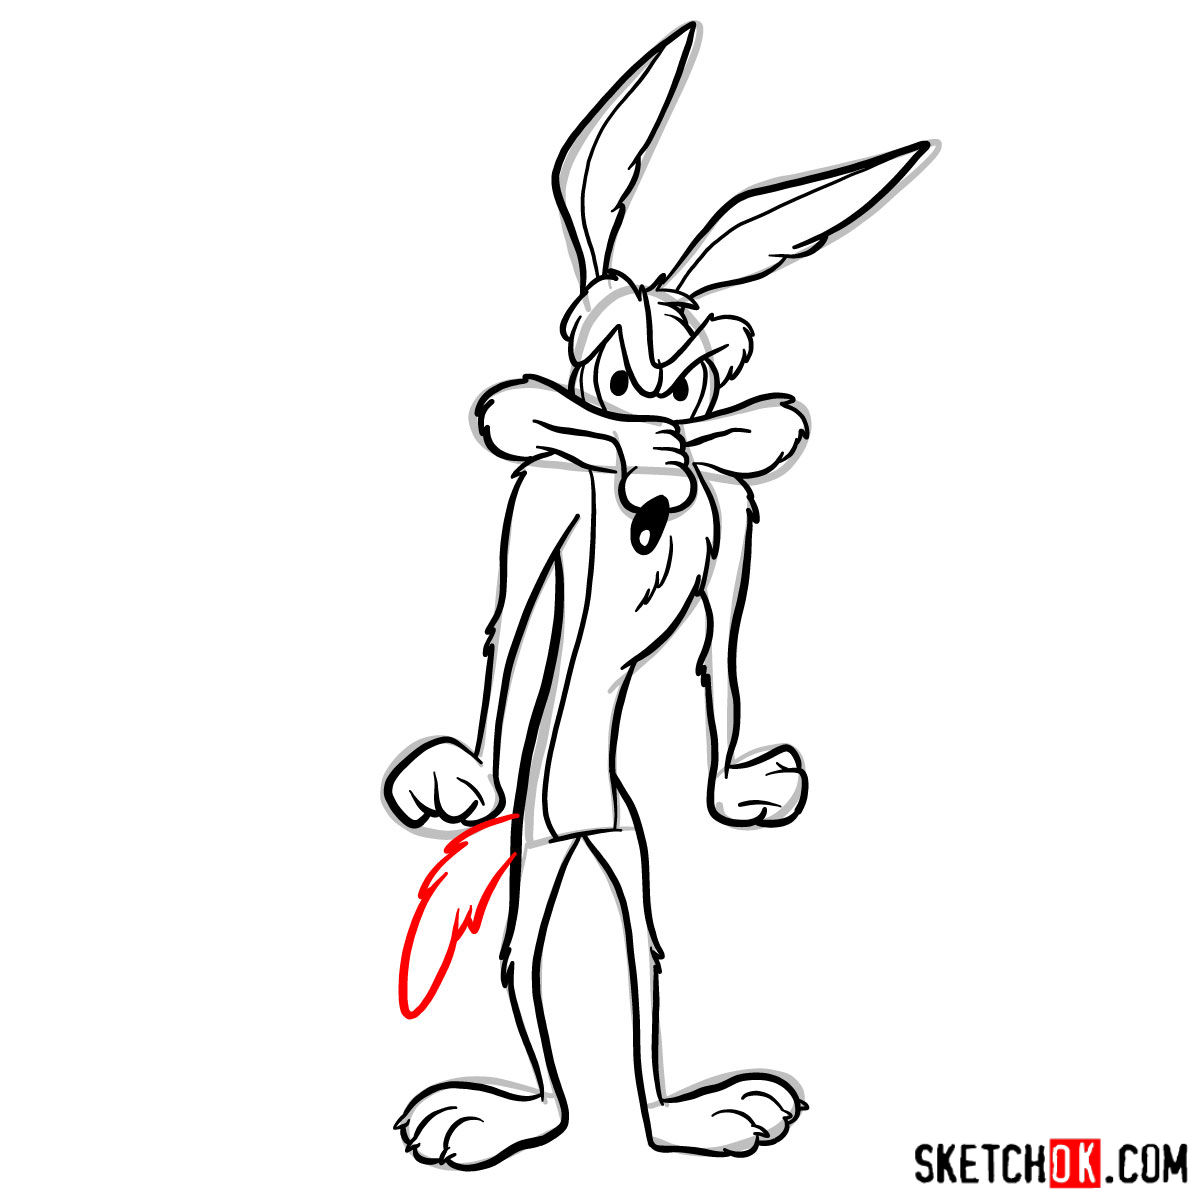 How to draw Wile E. Coyote - step 10